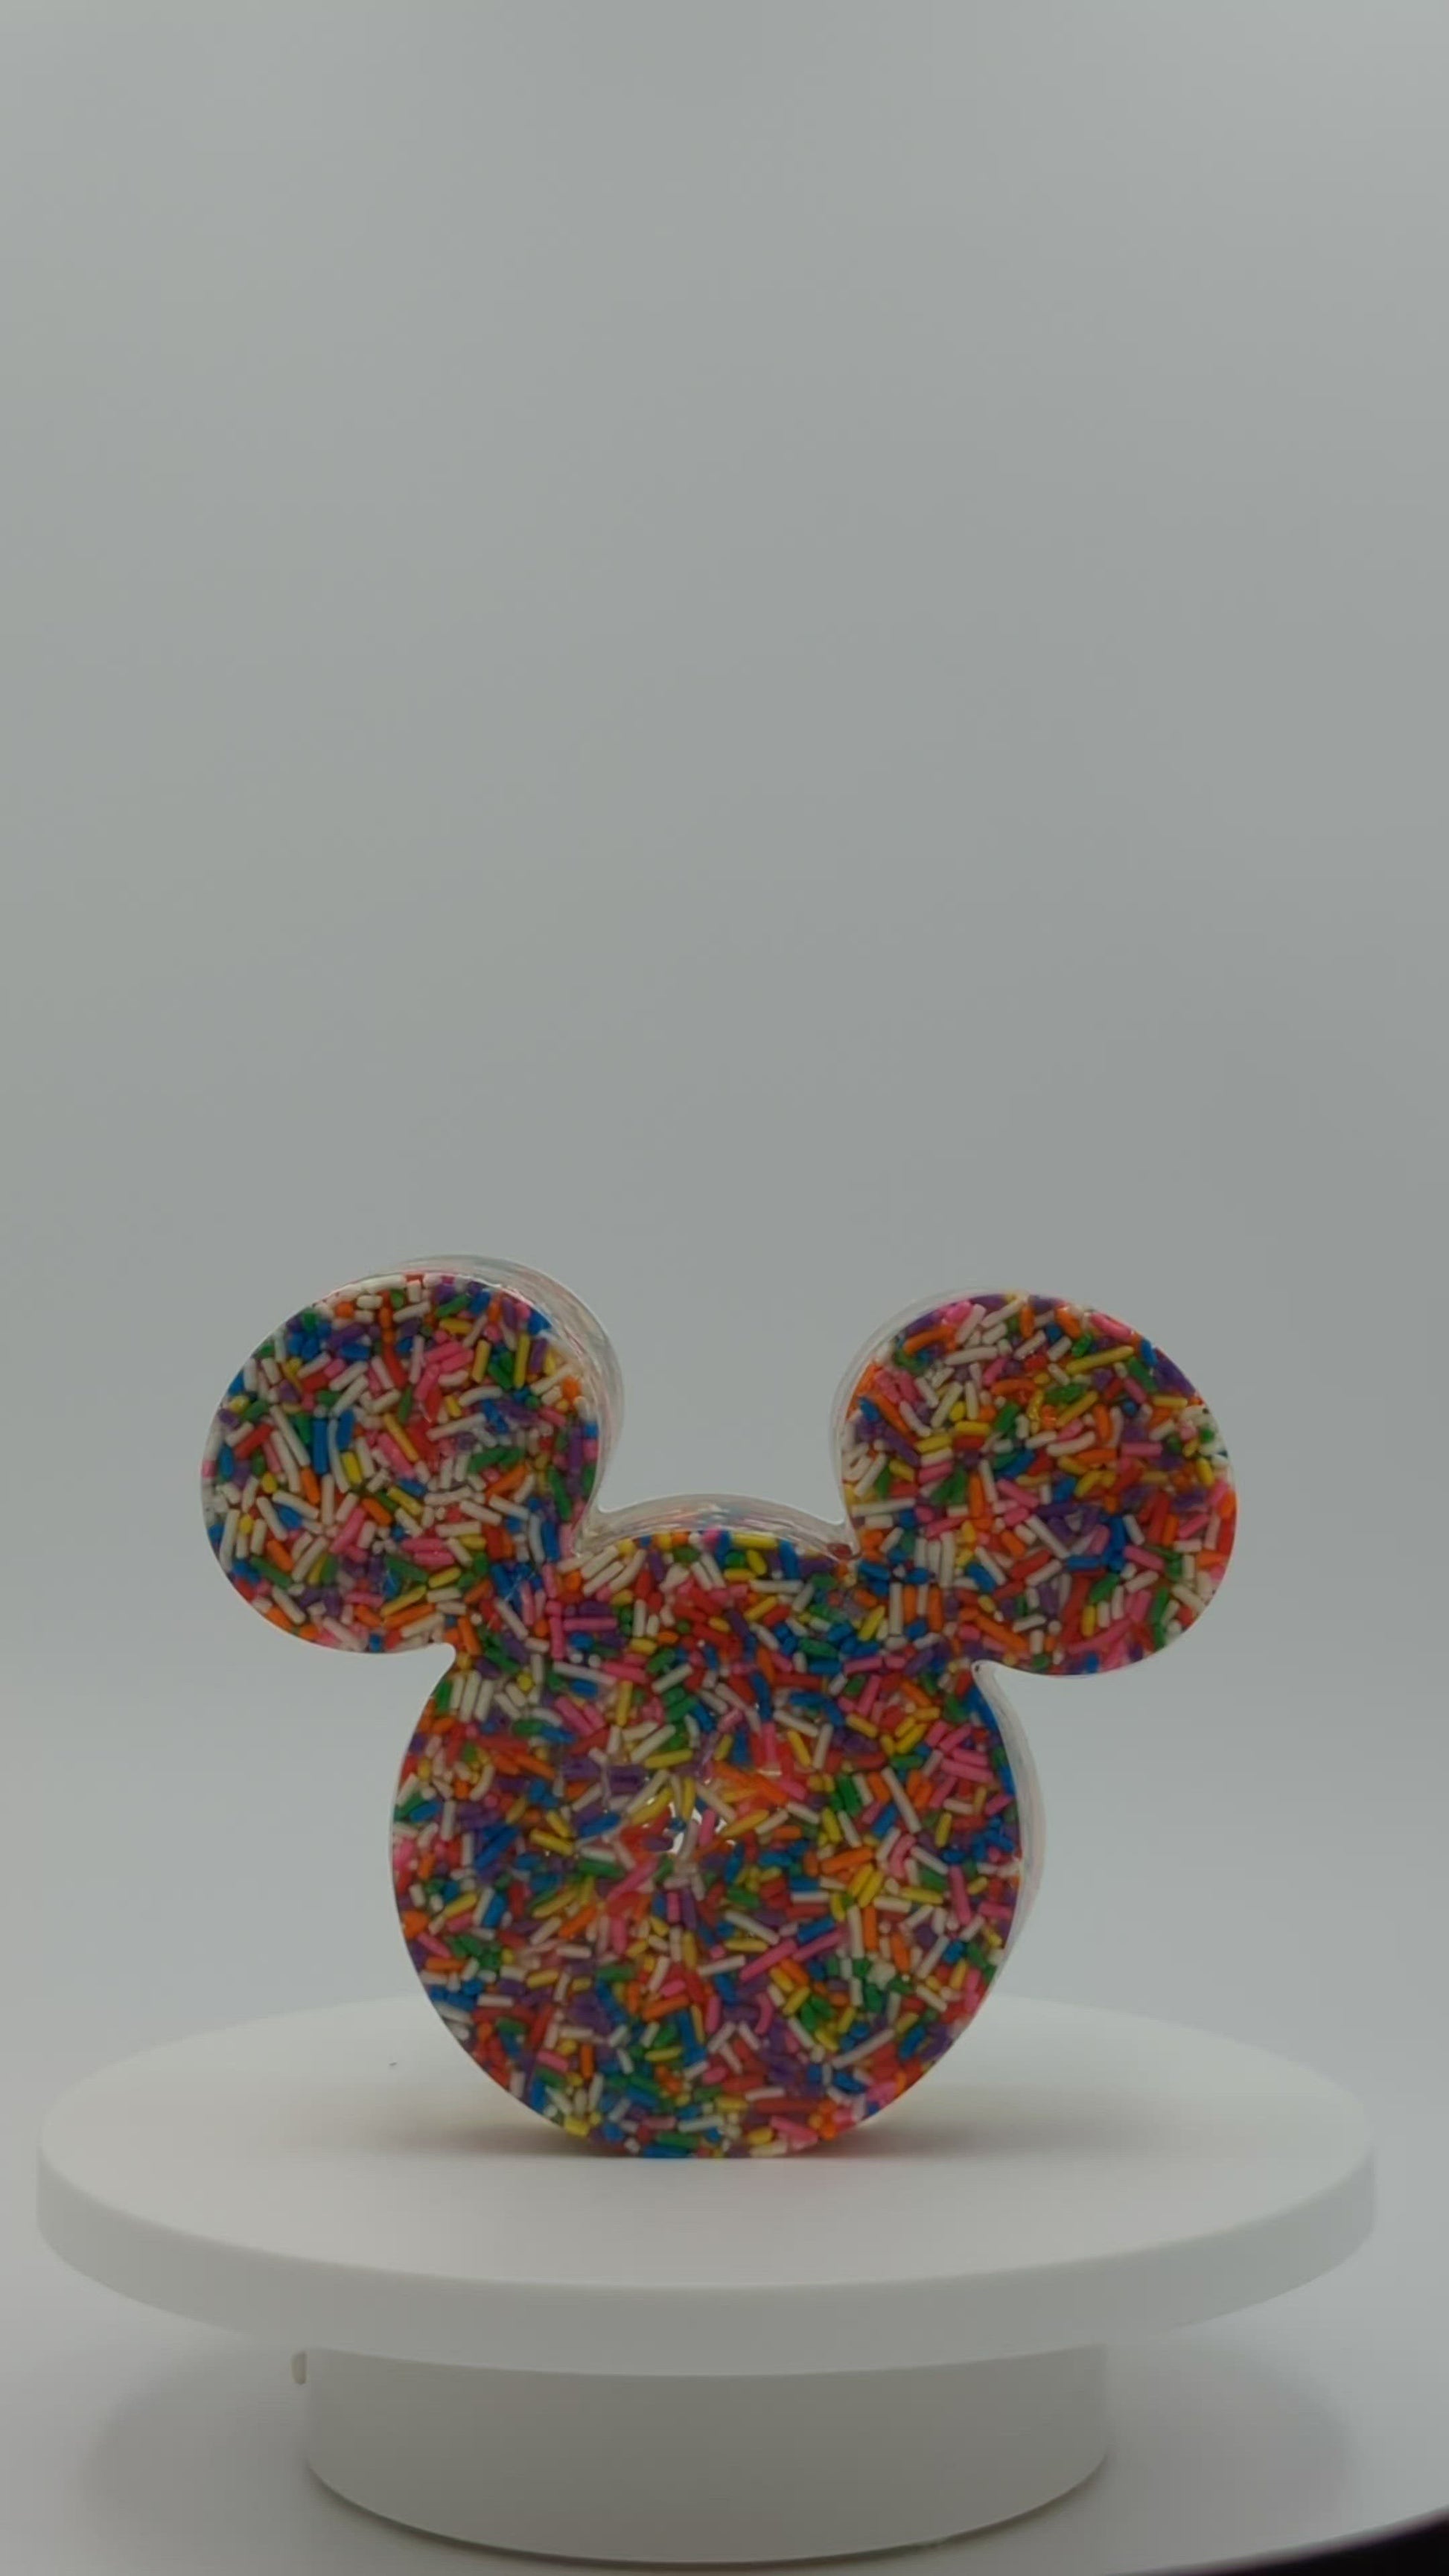 Mickey Ears Resin Sculpture - Faceted Front / Smooth Back - Gold